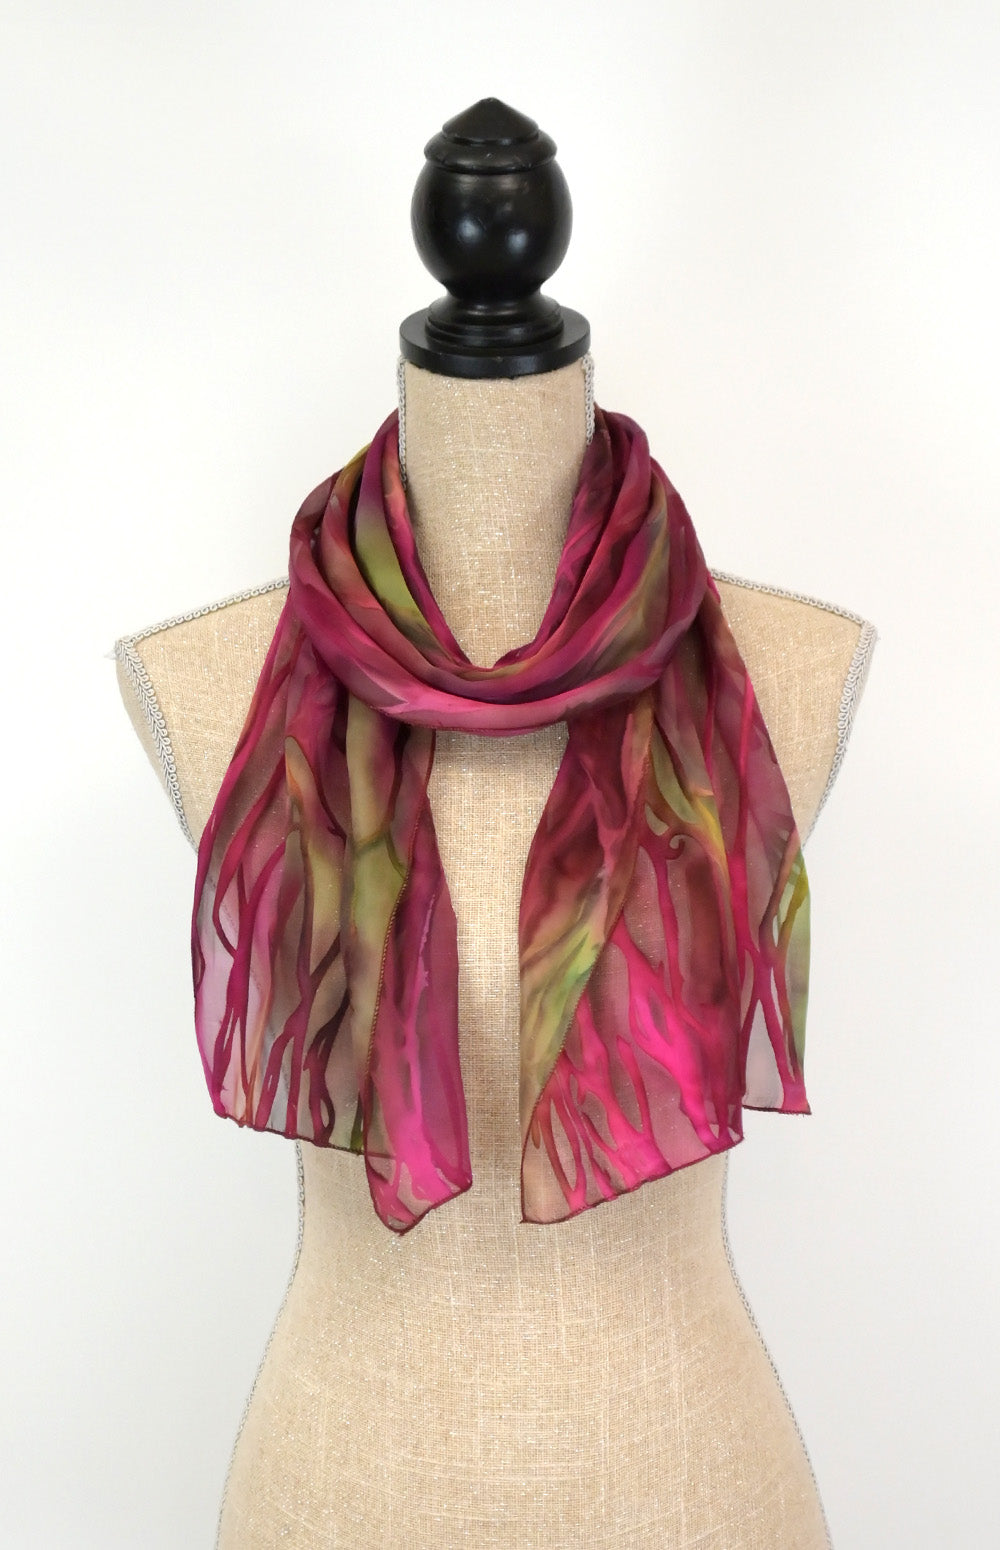 Etched Silk-Satin Fashion Scarves | Silk Concepts - Silk Concepts